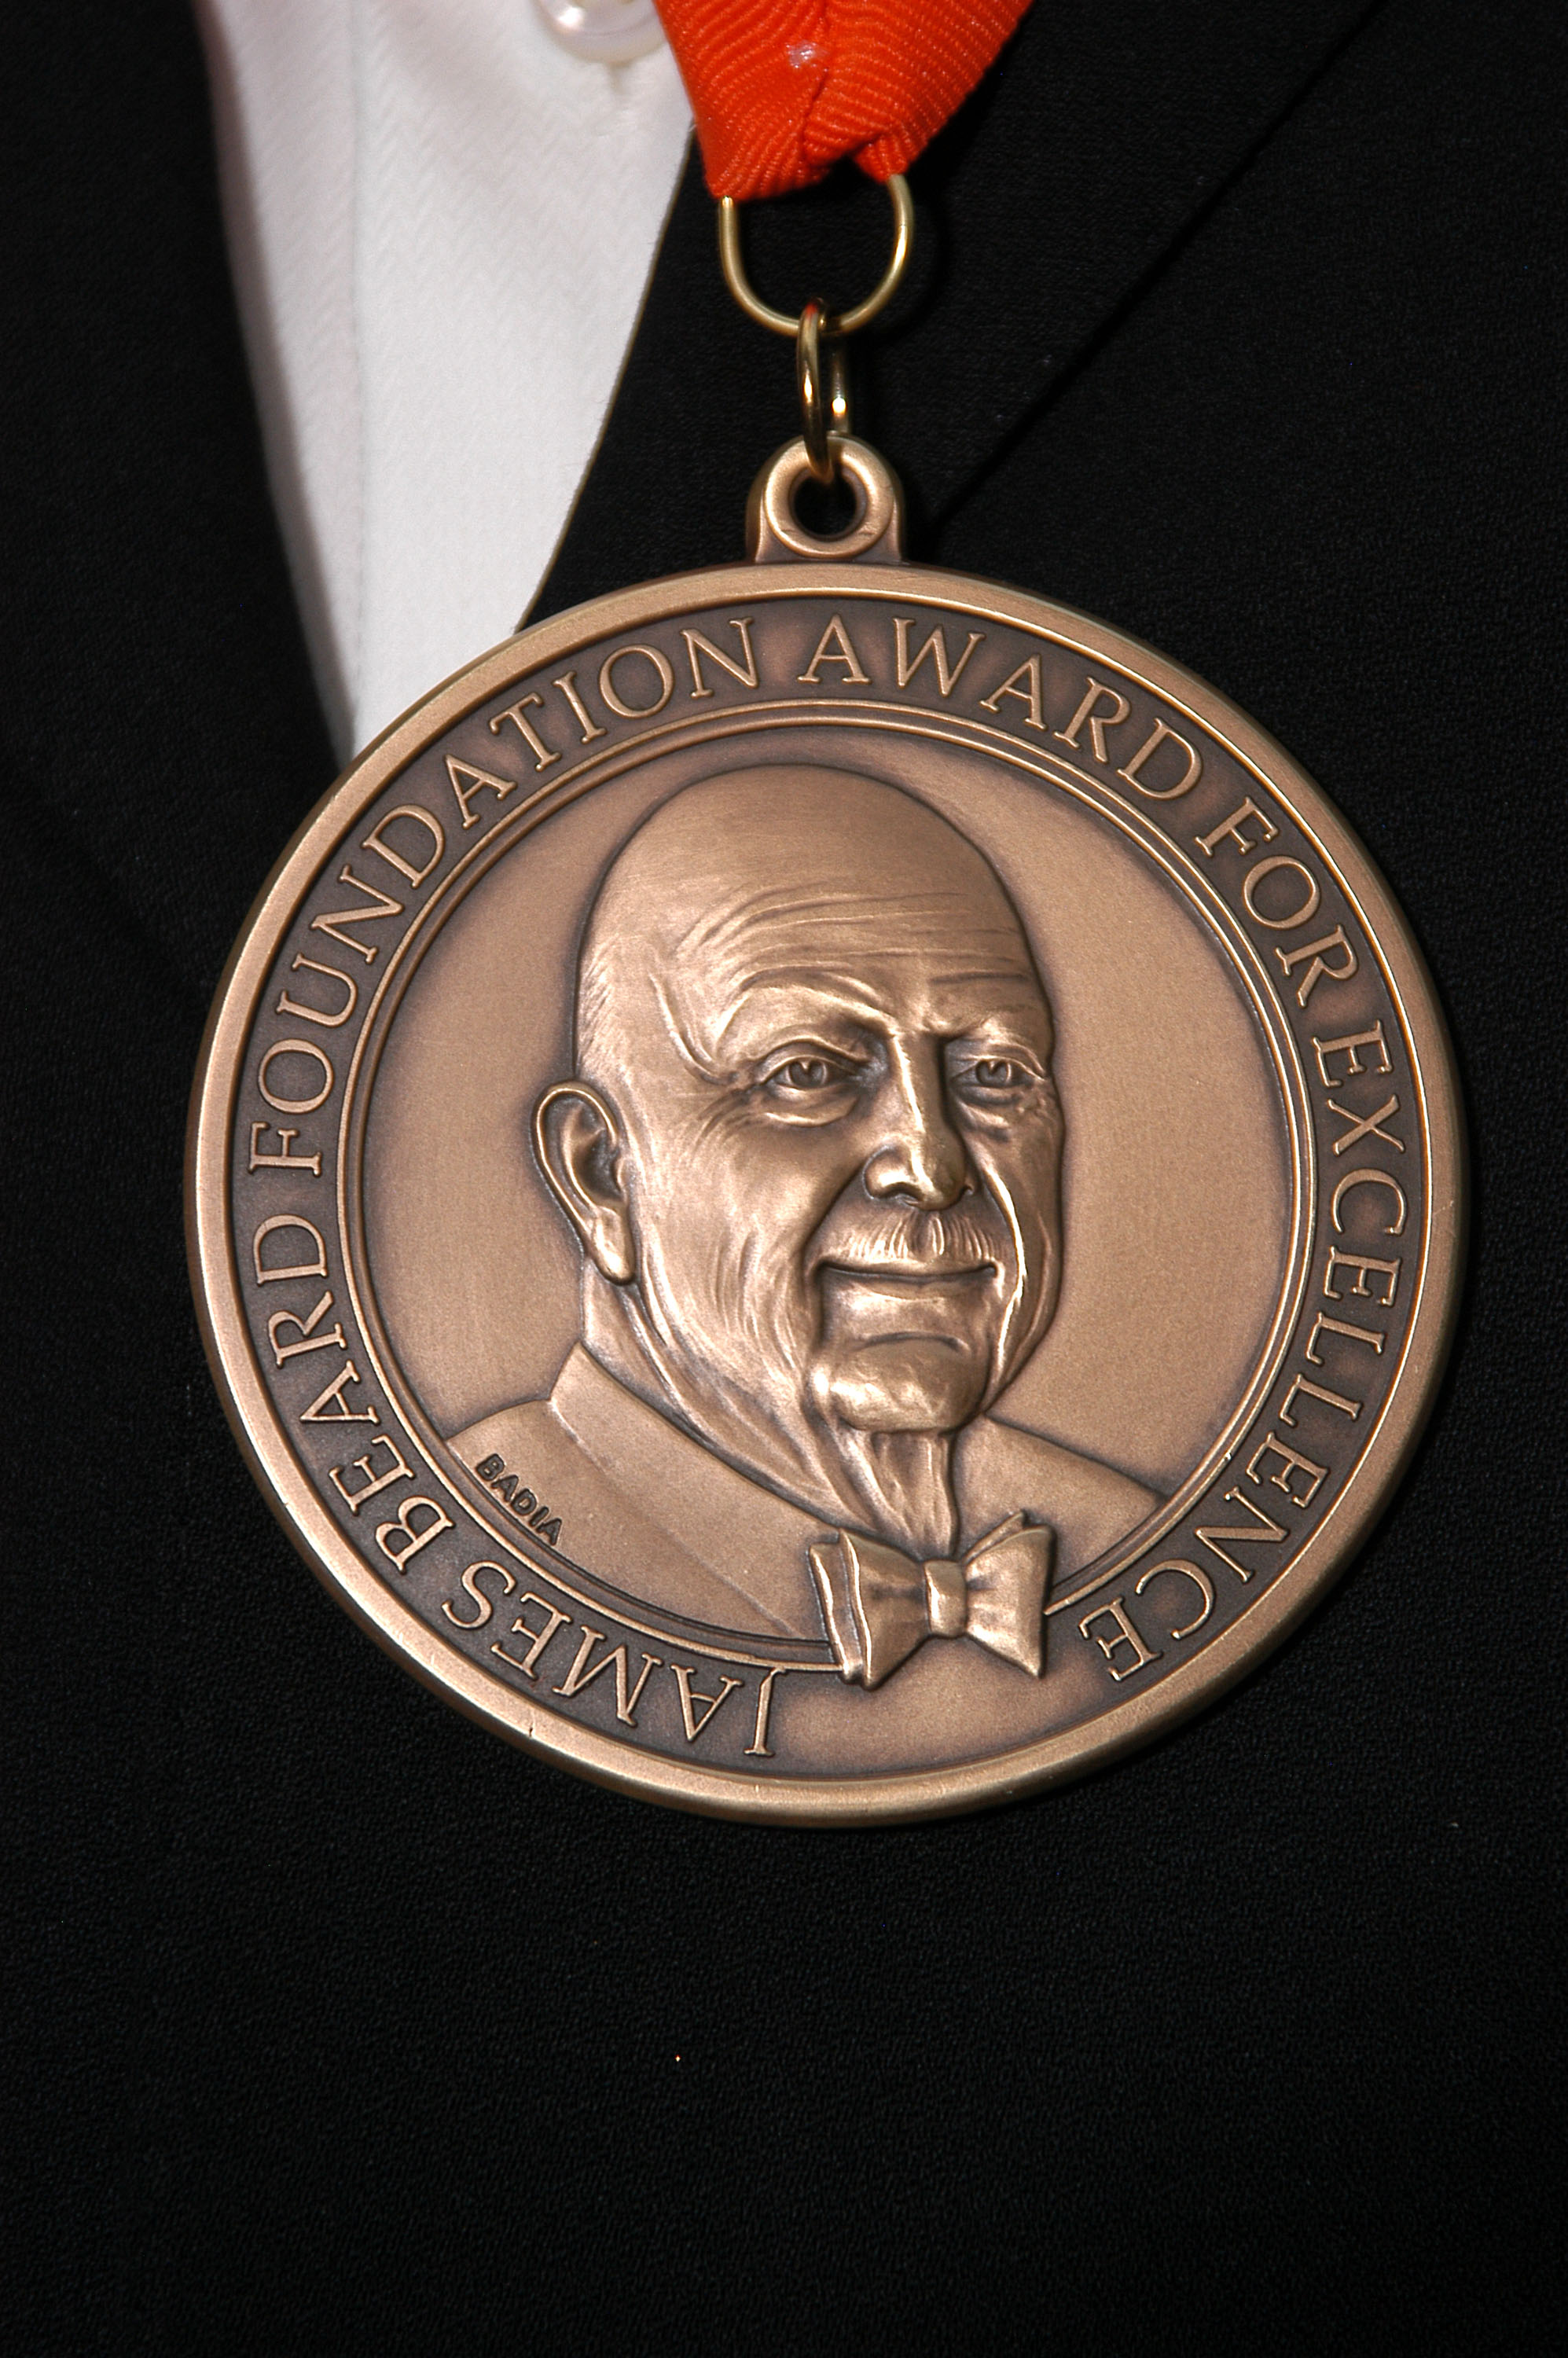 James Beard medal of the the 2009 James Beard Foundation Awards Ceremony and Gala at Avery Fisher Hall at Lincoln Center for the Performing Arts on May 4, 2009 in New York City.